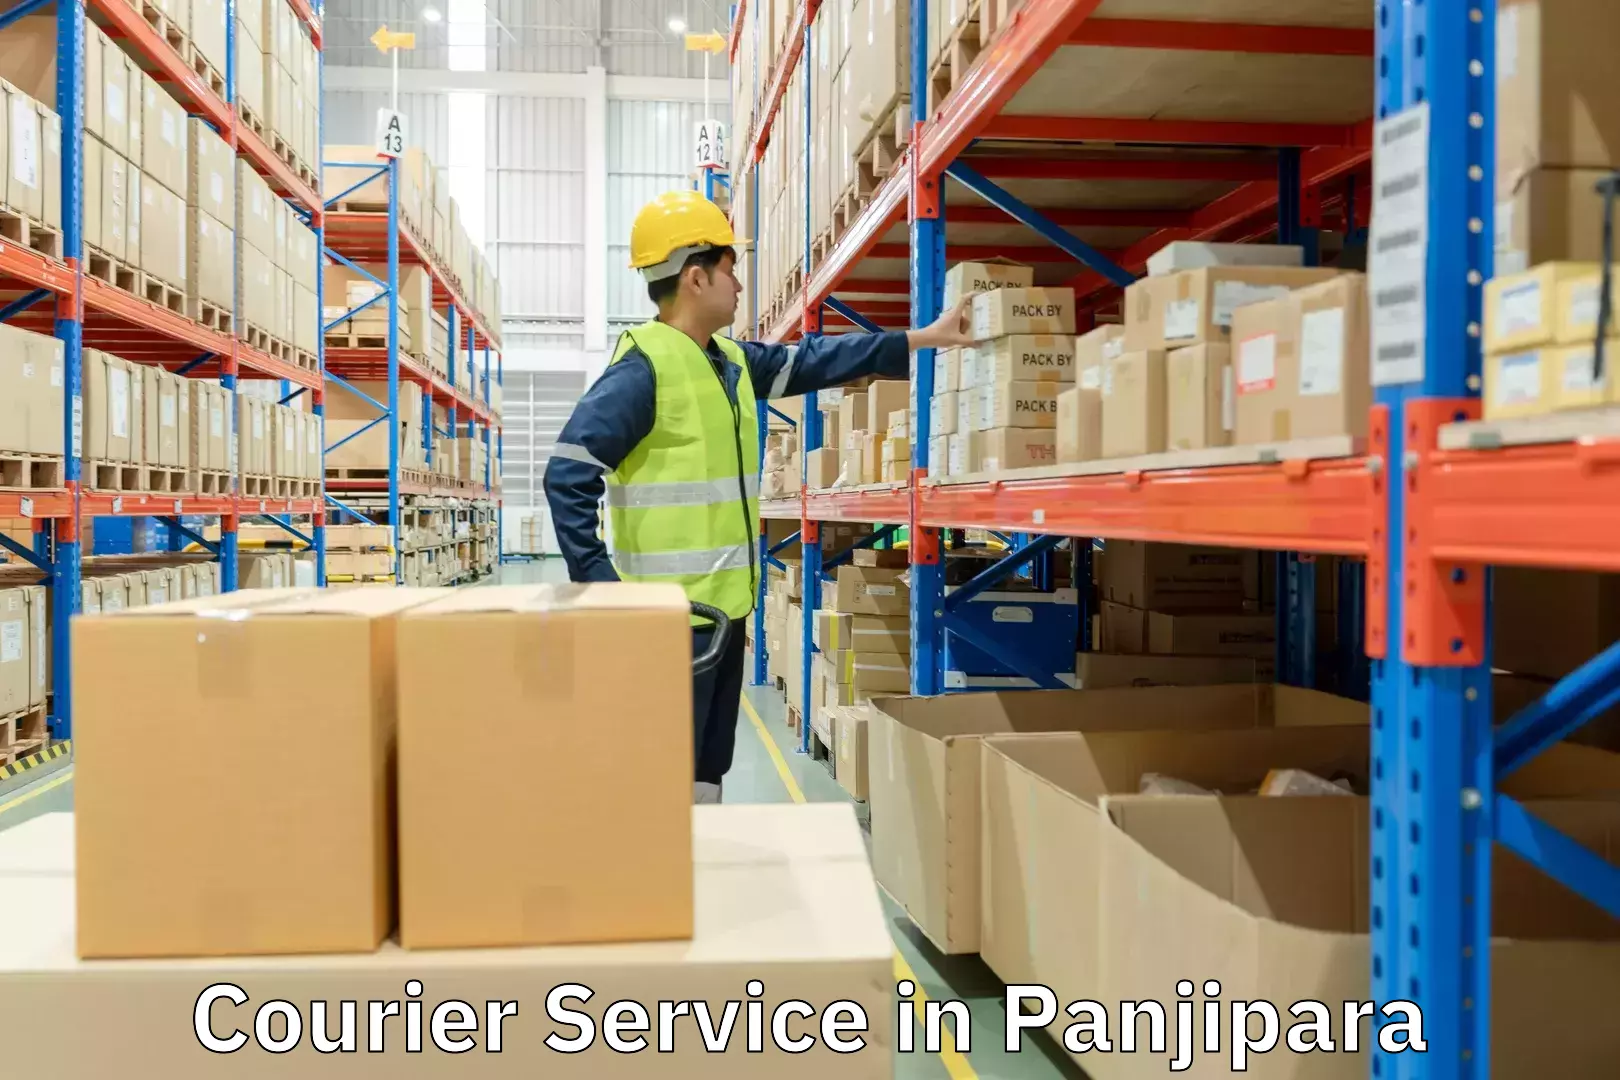 Emergency parcel delivery in Panjipara